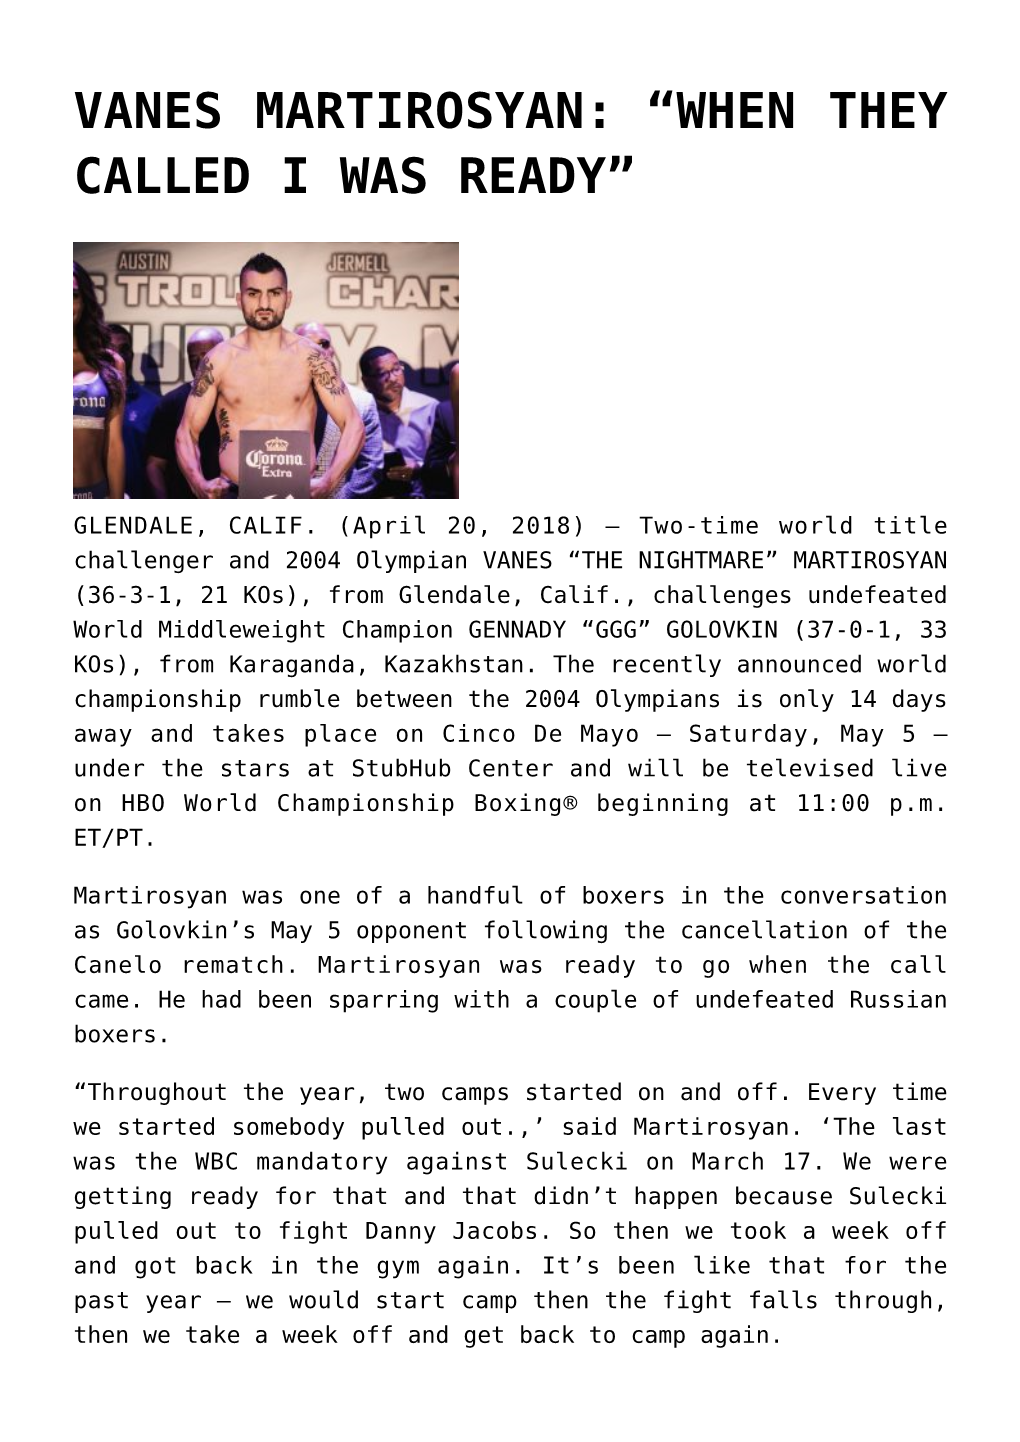 Vanes Martirosyan: “When They Called I Was Ready”